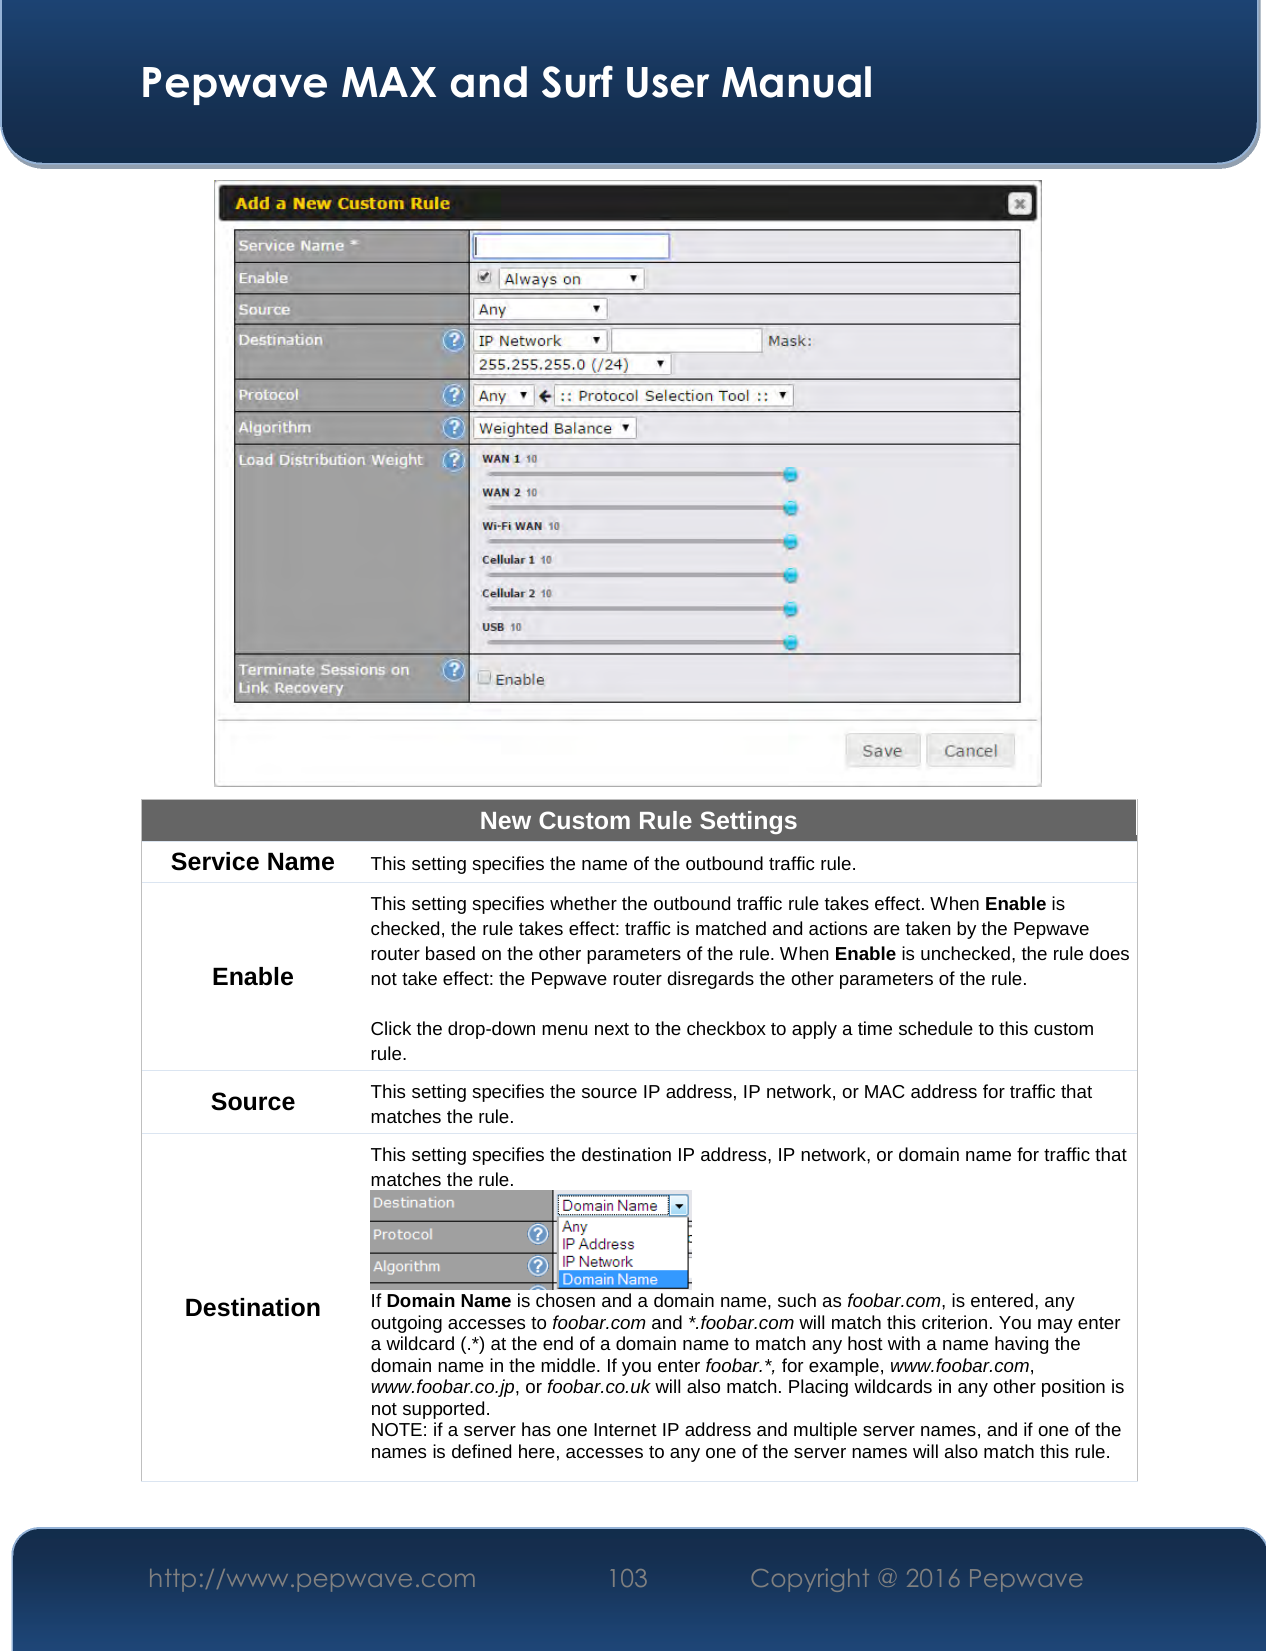  Pepwave MAX and Surf User Manual http://www.pepwave.com  103    Copyright @ 2016 Pepwave    New Custom Rule Settings Service Name  This setting specifies the name of the outbound traffic rule. Enable This setting specifies whether the outbound traffic rule takes effect. When Enable is checked, the rule takes effect: traffic is matched and actions are taken by the Pepwave router based on the other parameters of the rule. When Enable is unchecked, the rule does not take effect: the Pepwave router disregards the other parameters of the rule.  Click the drop-down menu next to the checkbox to apply a time schedule to this custom rule. Source  This setting specifies the source IP address, IP network, or MAC address for traffic that matches the rule. Destination This setting specifies the destination IP address, IP network, or domain name for traffic that matches the rule.  If Domain Name is chosen and a domain name, such as foobar.com, is entered, any outgoing accesses to foobar.com and *.foobar.com will match this criterion. You may enter a wildcard (.*) at the end of a domain name to match any host with a name having the domain name in the middle. If you enter foobar.*, for example, www.foobar.com, www.foobar.co.jp, or foobar.co.uk will also match. Placing wildcards in any other position is not supported. NOTE: if a server has one Internet IP address and multiple server names, and if one of the names is defined here, accesses to any one of the server names will also match this rule. 